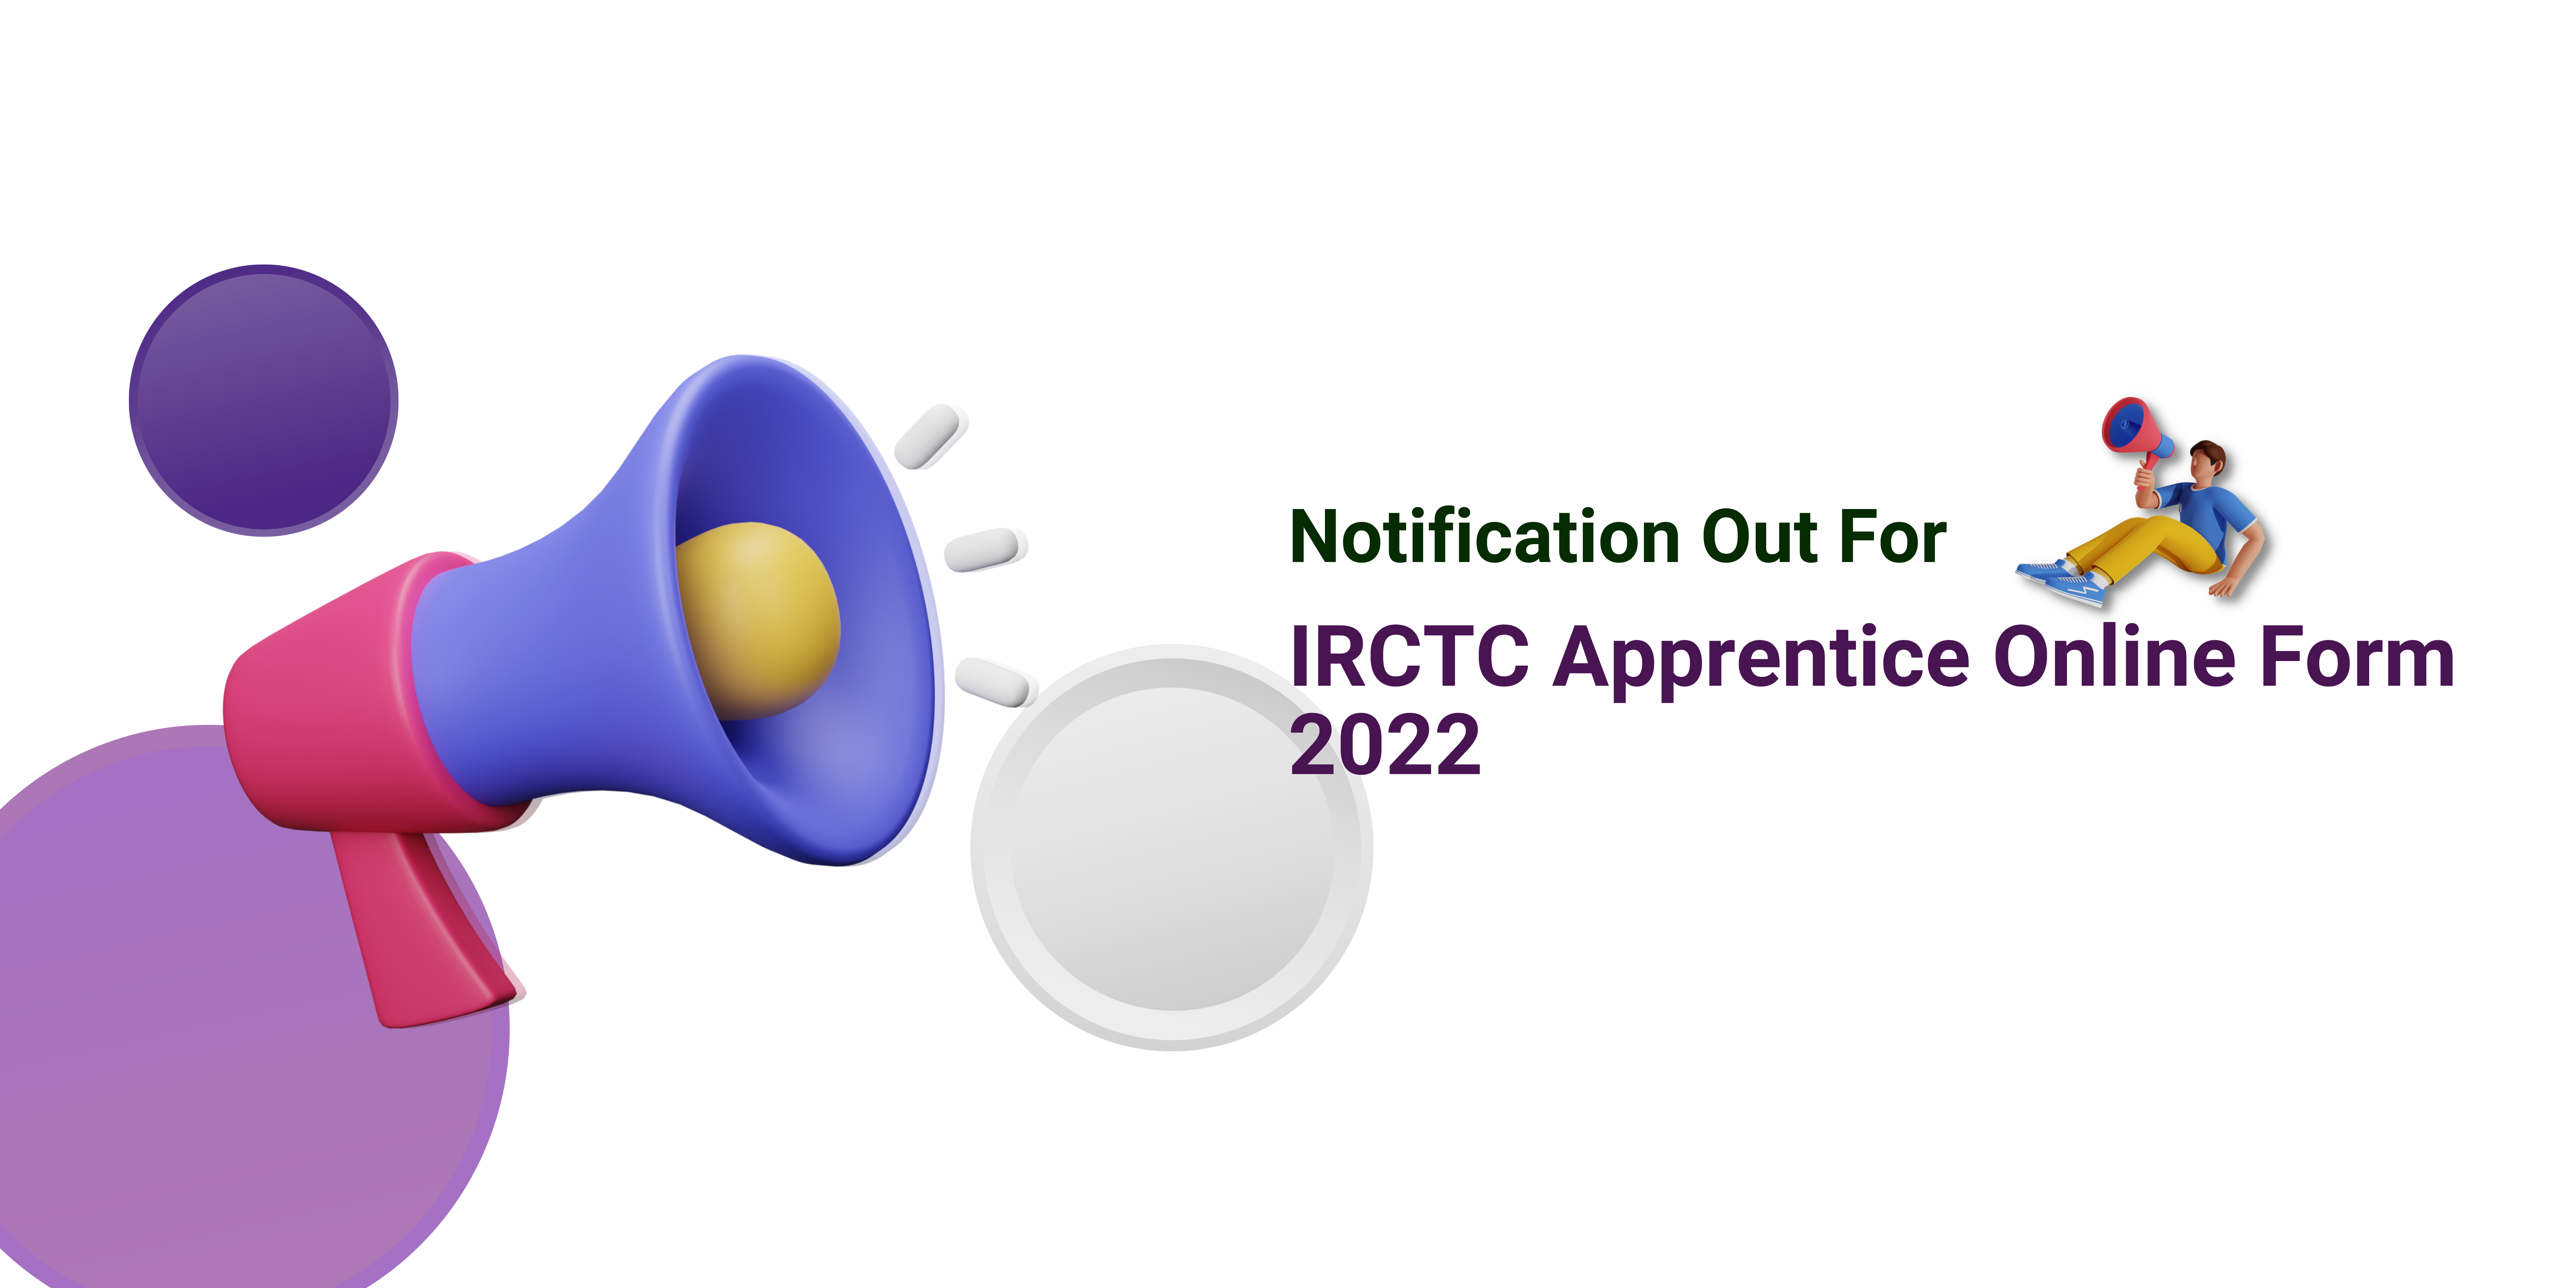 IRCTC Apprentice 2022 Notification Out